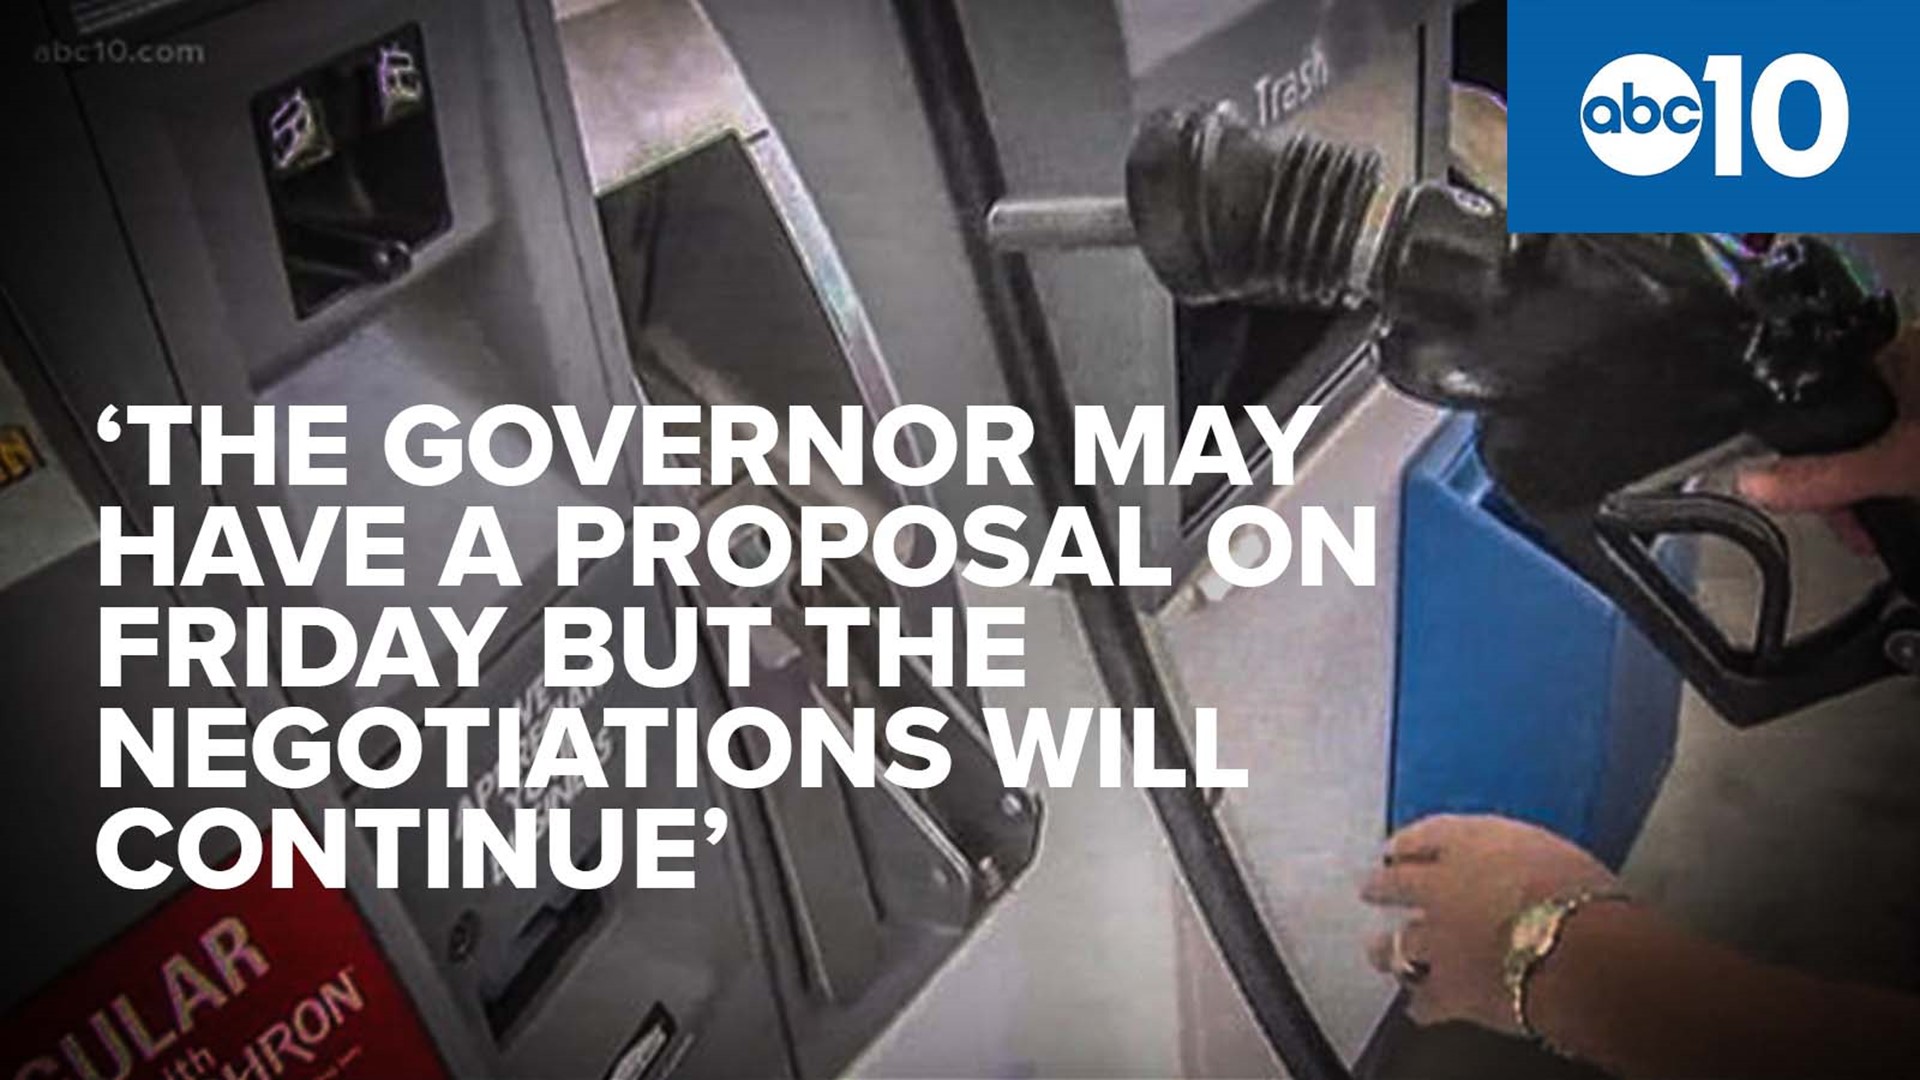 Our Morgan Rynor reports $12 billion of the relief funds is dedicated to Newsom's gas tax rebate, which includes a $400 refund per registered vehicle owner.